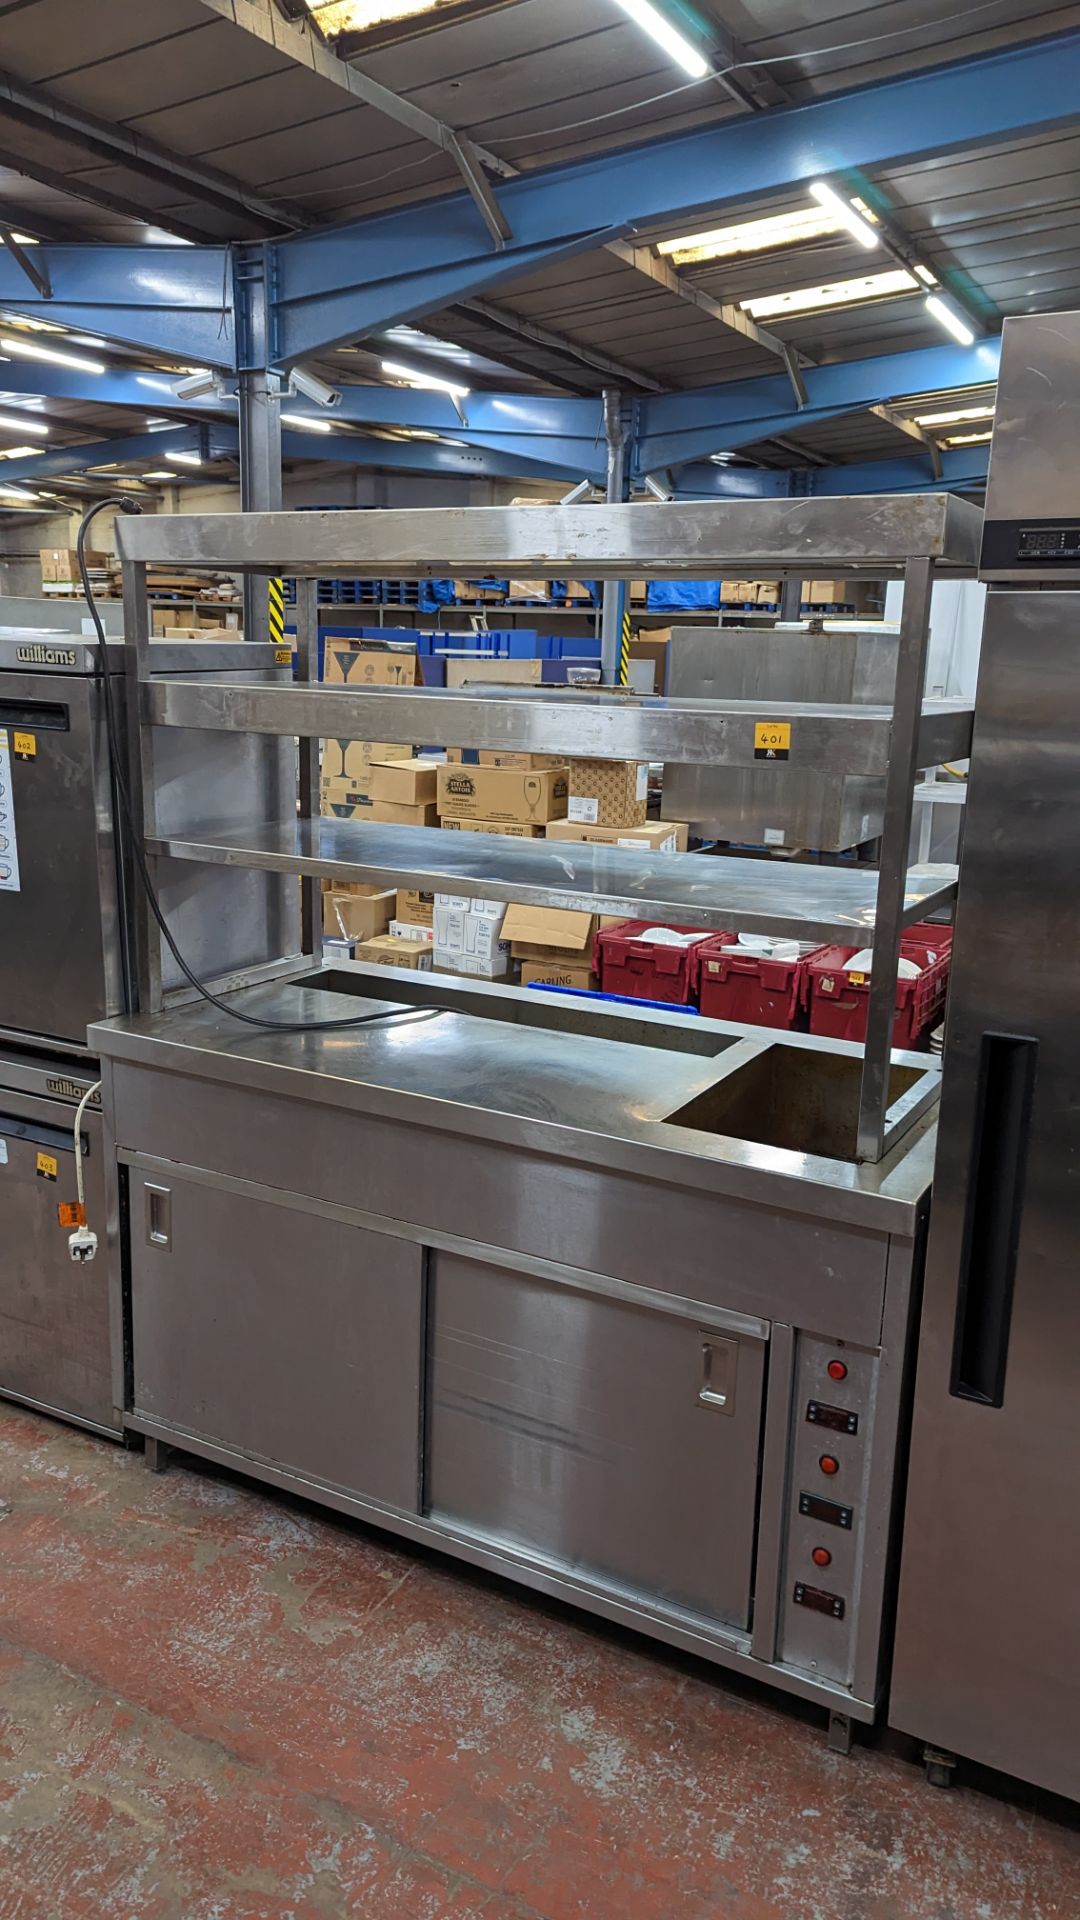 Large stainless steel warming unit with multi-tier shelving above